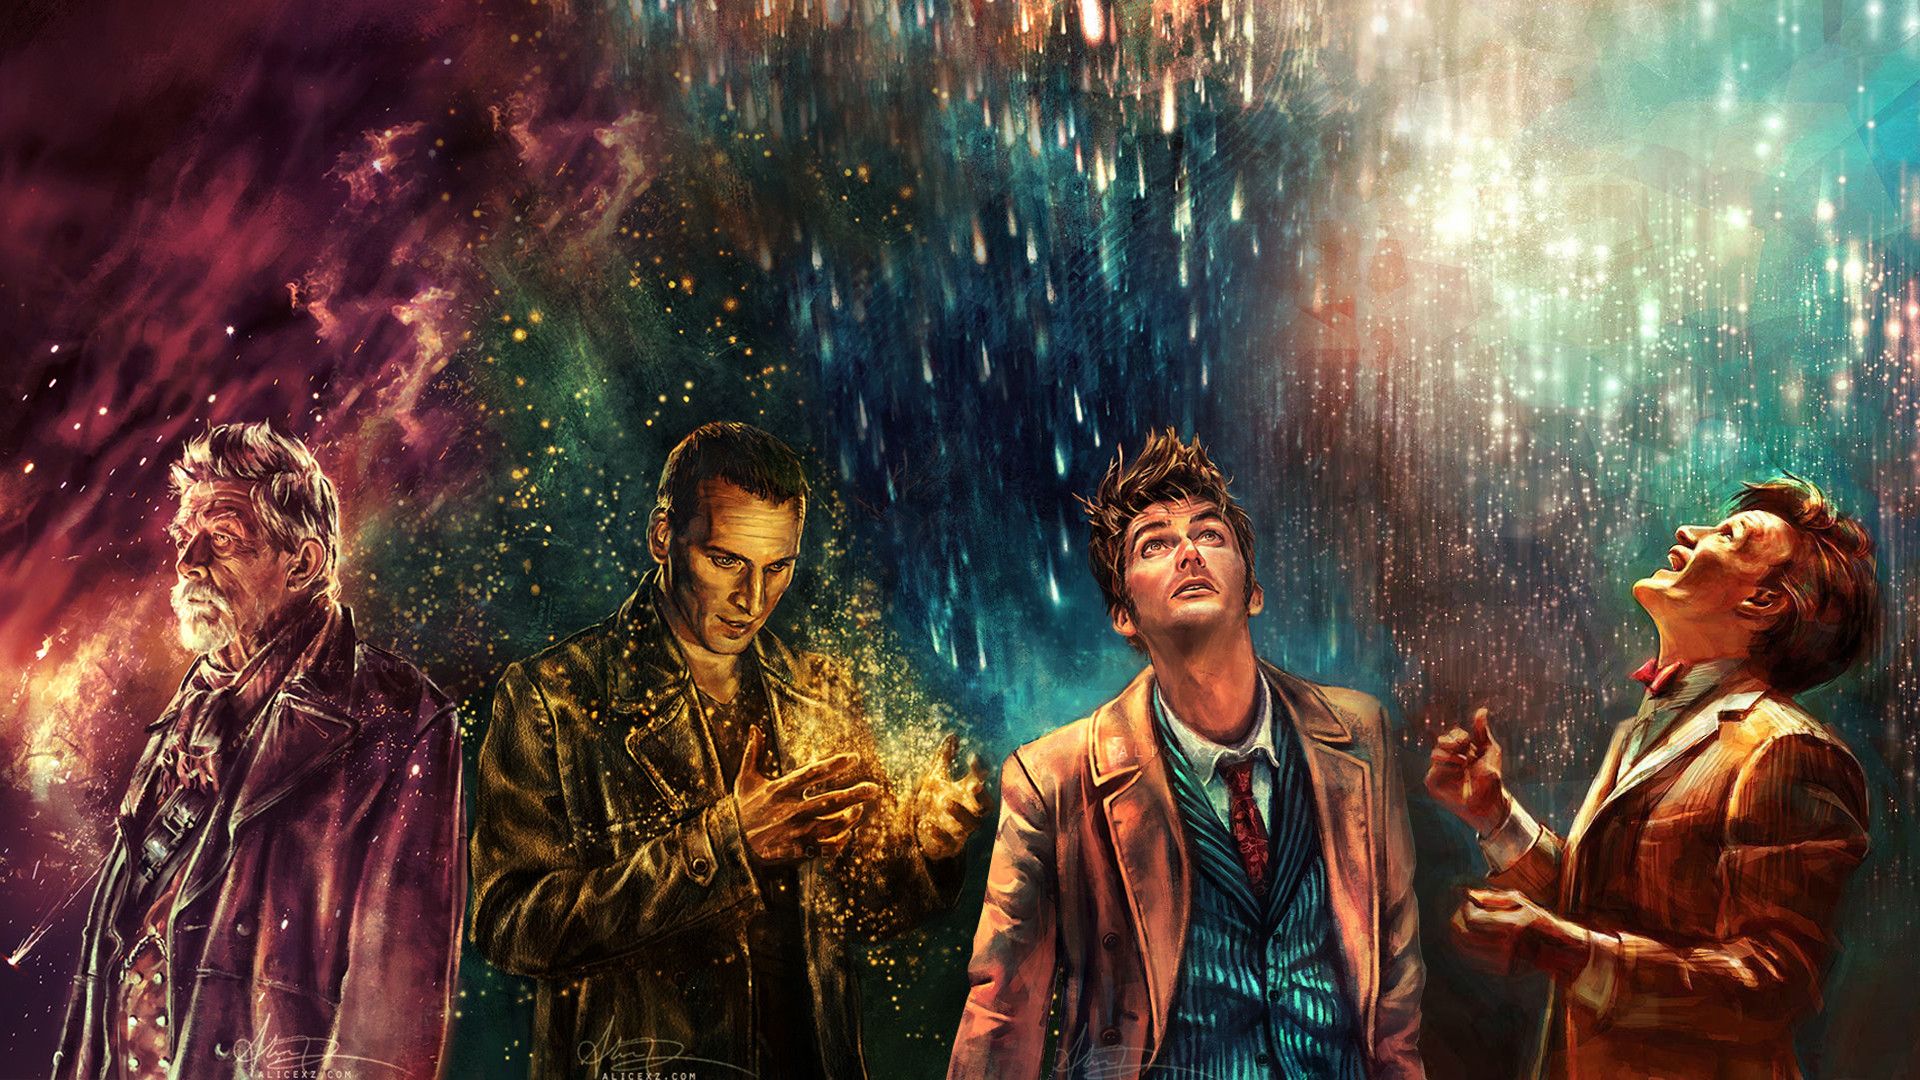 Could someone add the 12th Doctor to this wallpaper?